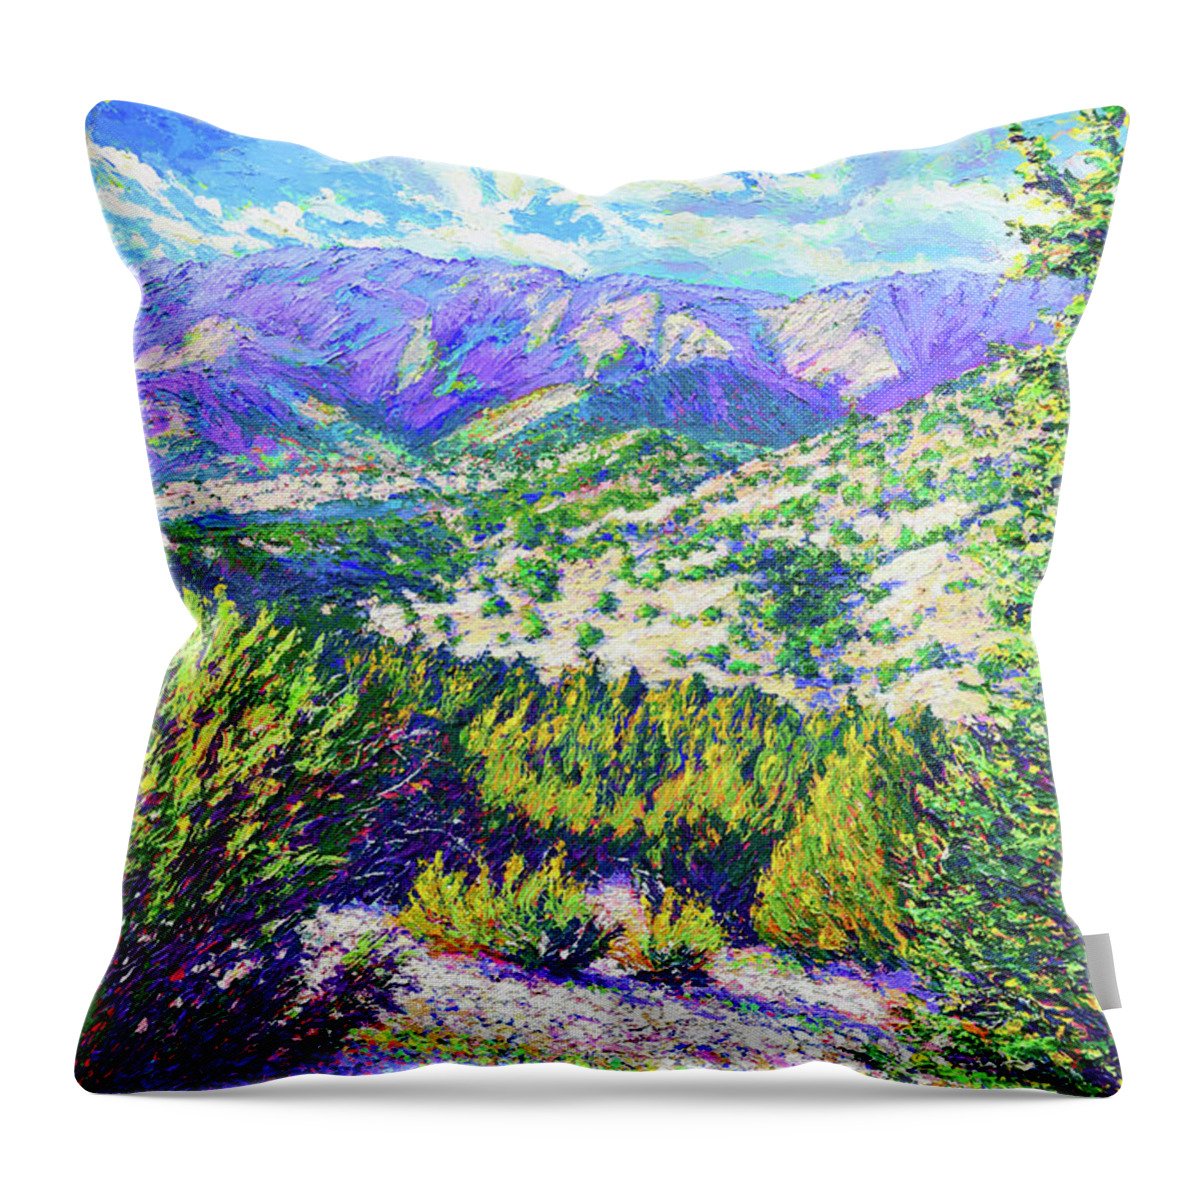 Impressionism Throw Pillow featuring the painting A Bright Spot in My Day by Darien Bogart